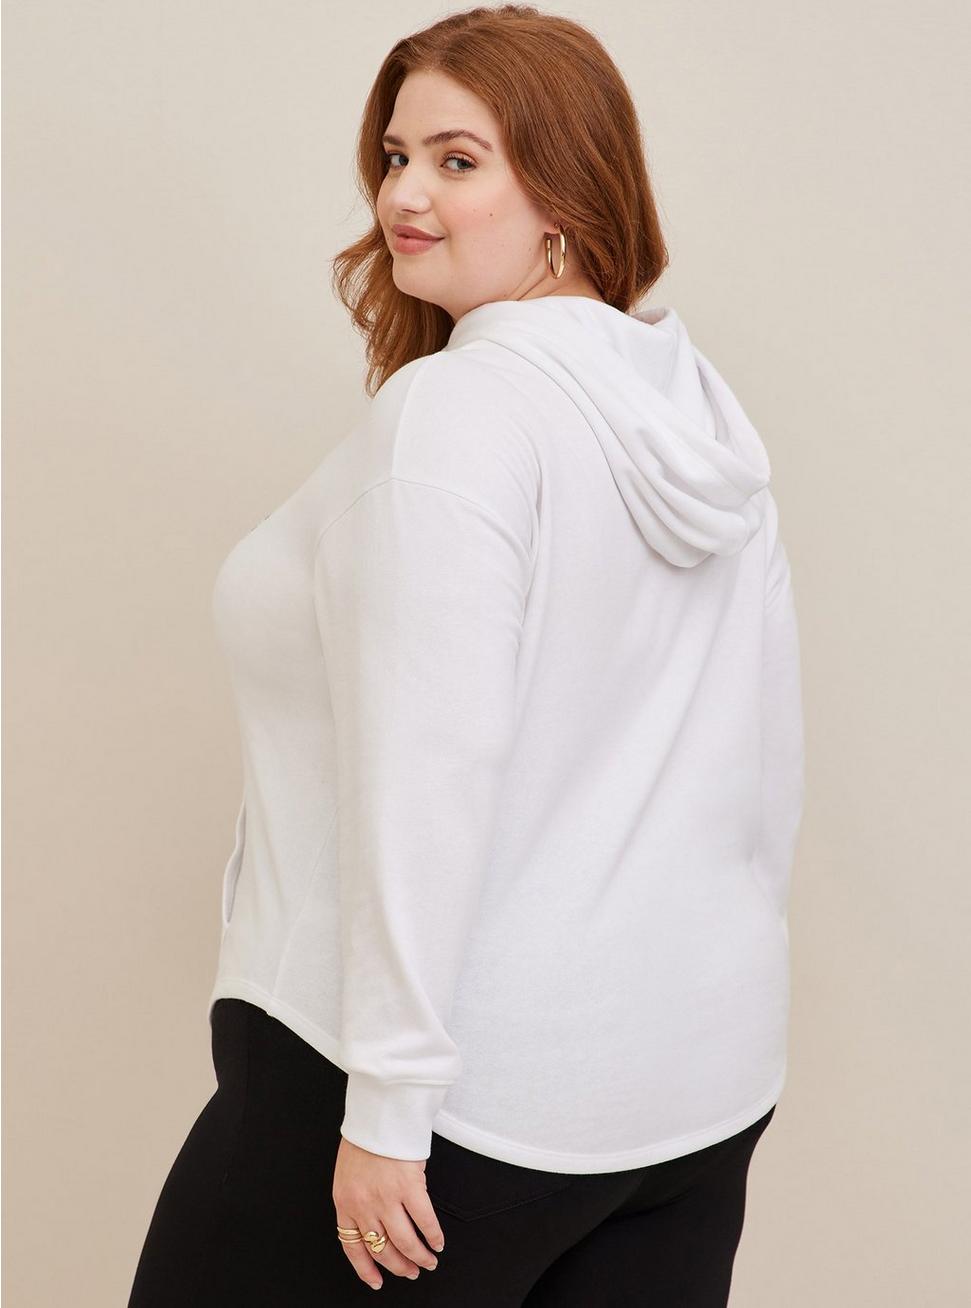 Plus Size Warner Bros. Friends Relaxed Fit Cozy Fleece Hoodie, BRIGHT WHITE, alternate